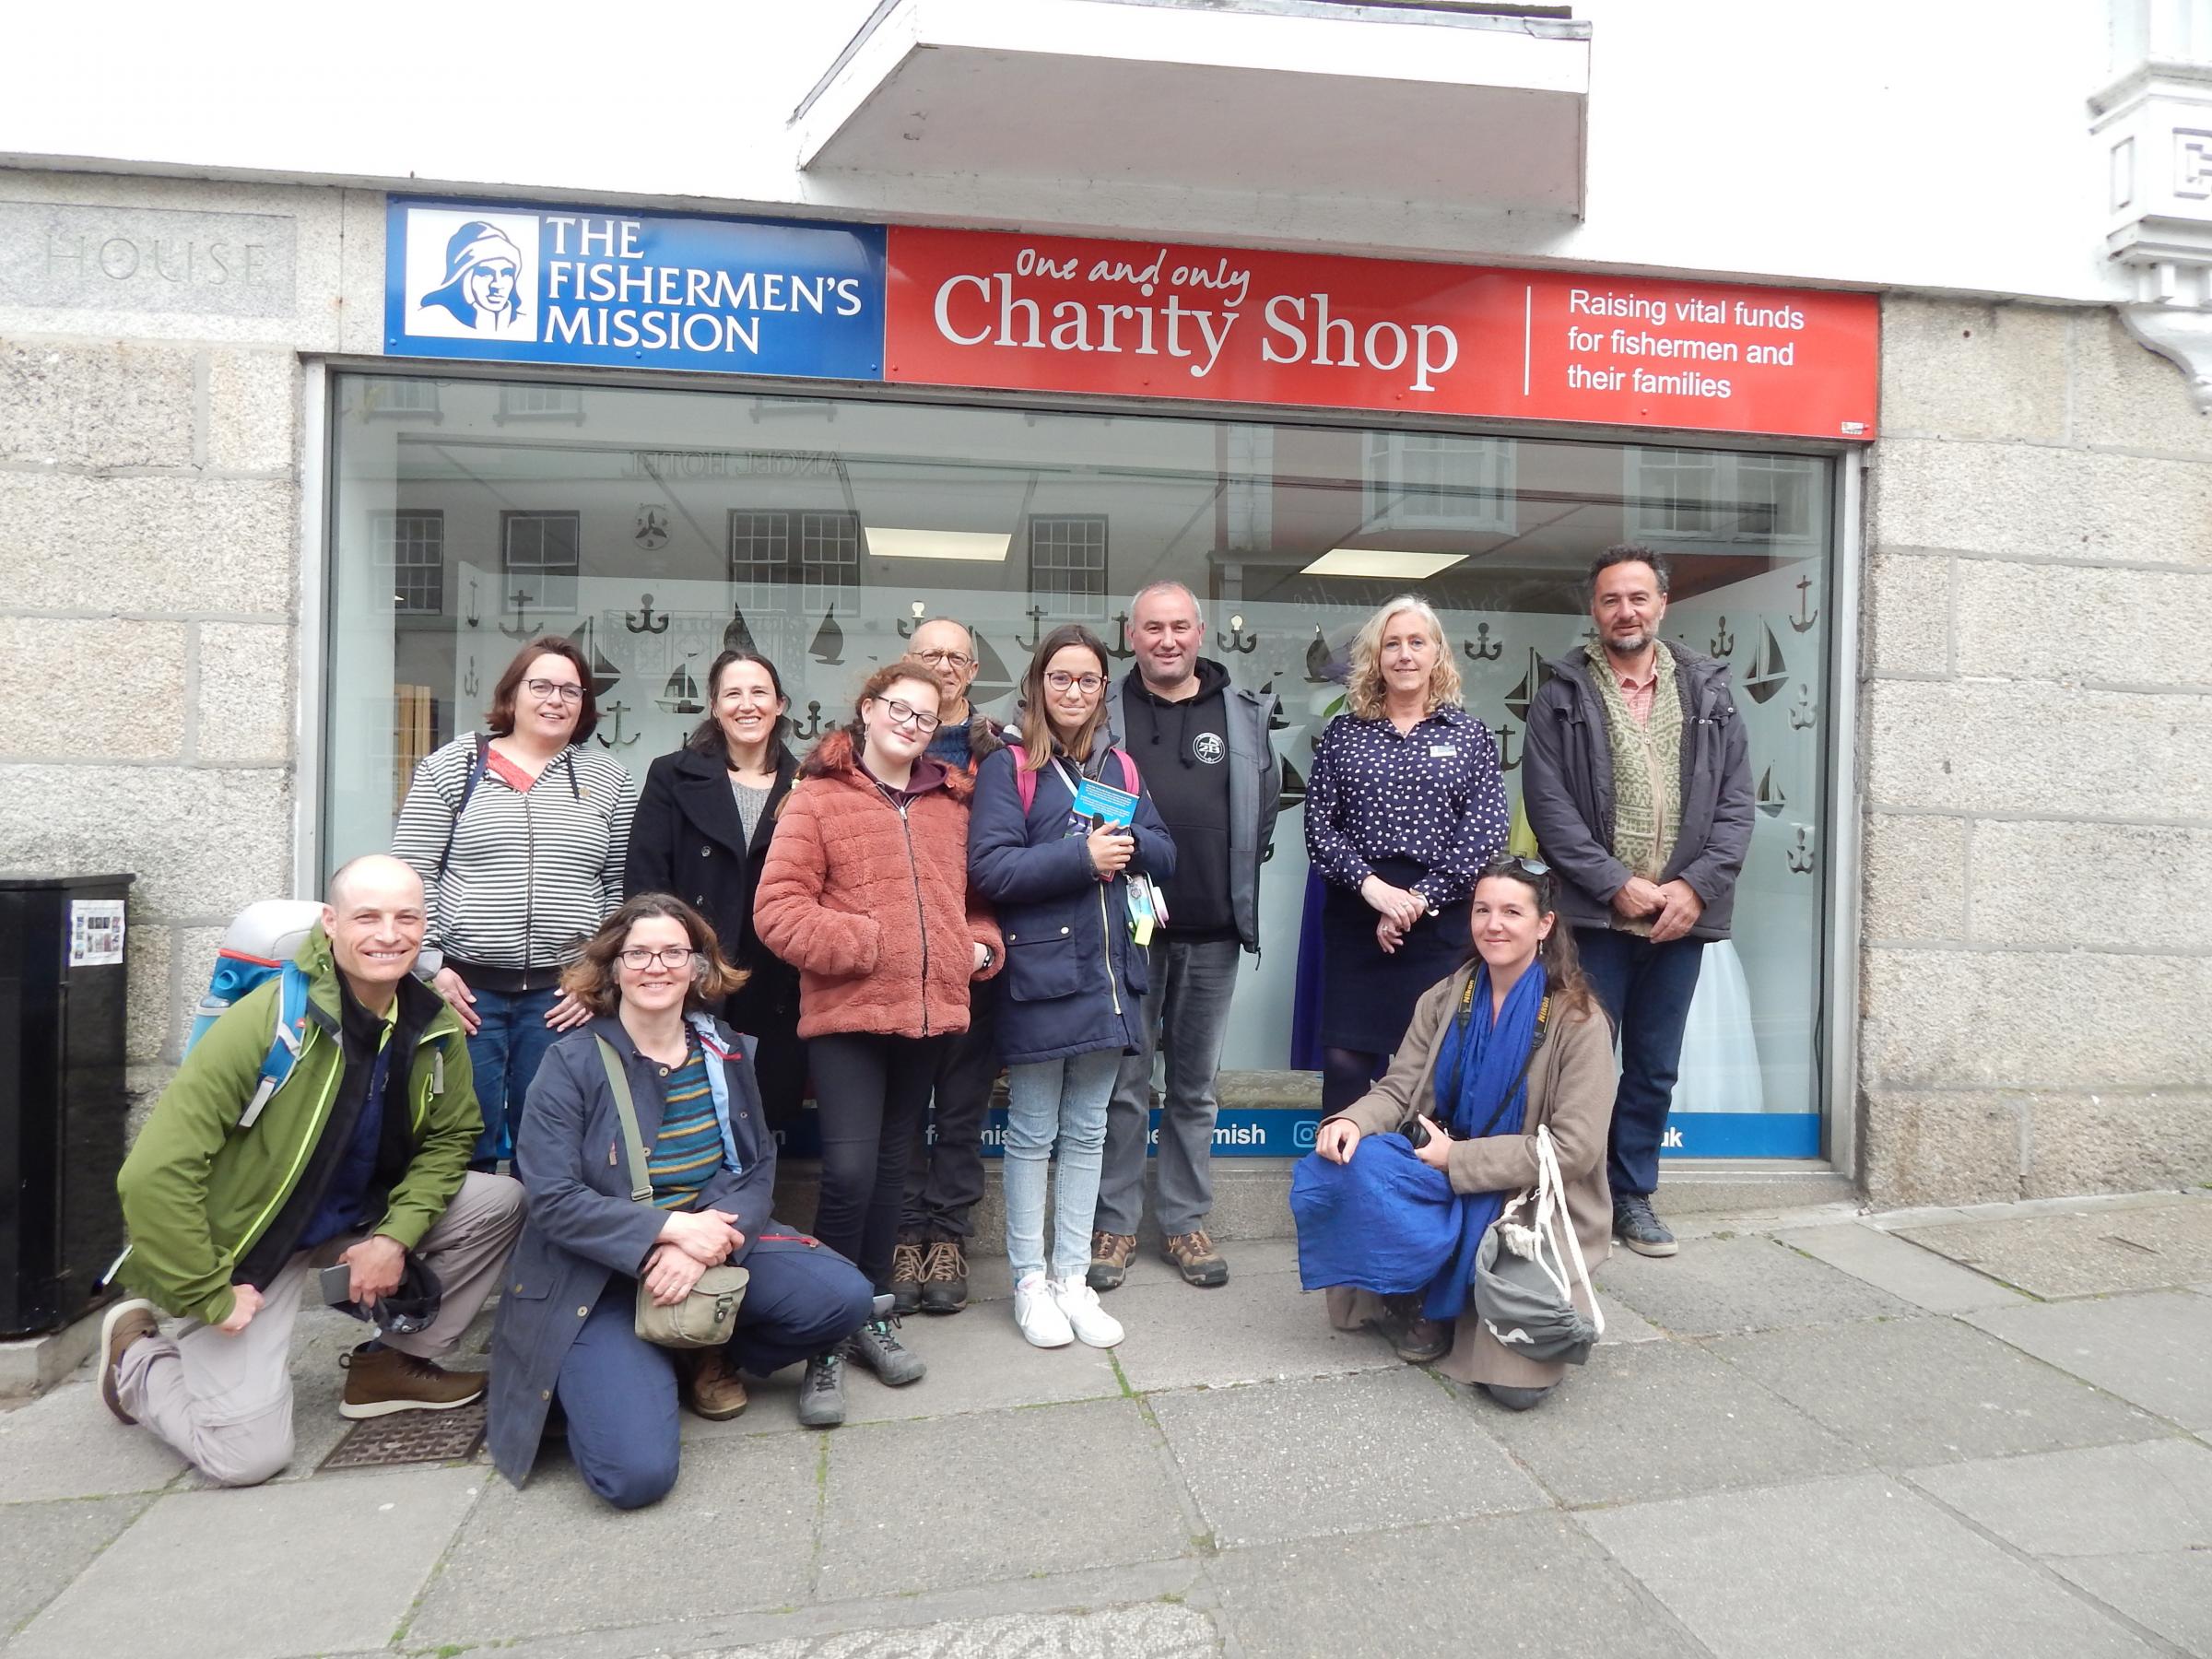 Visitors first tour was Helstons Fishermens Mission charity shop. 